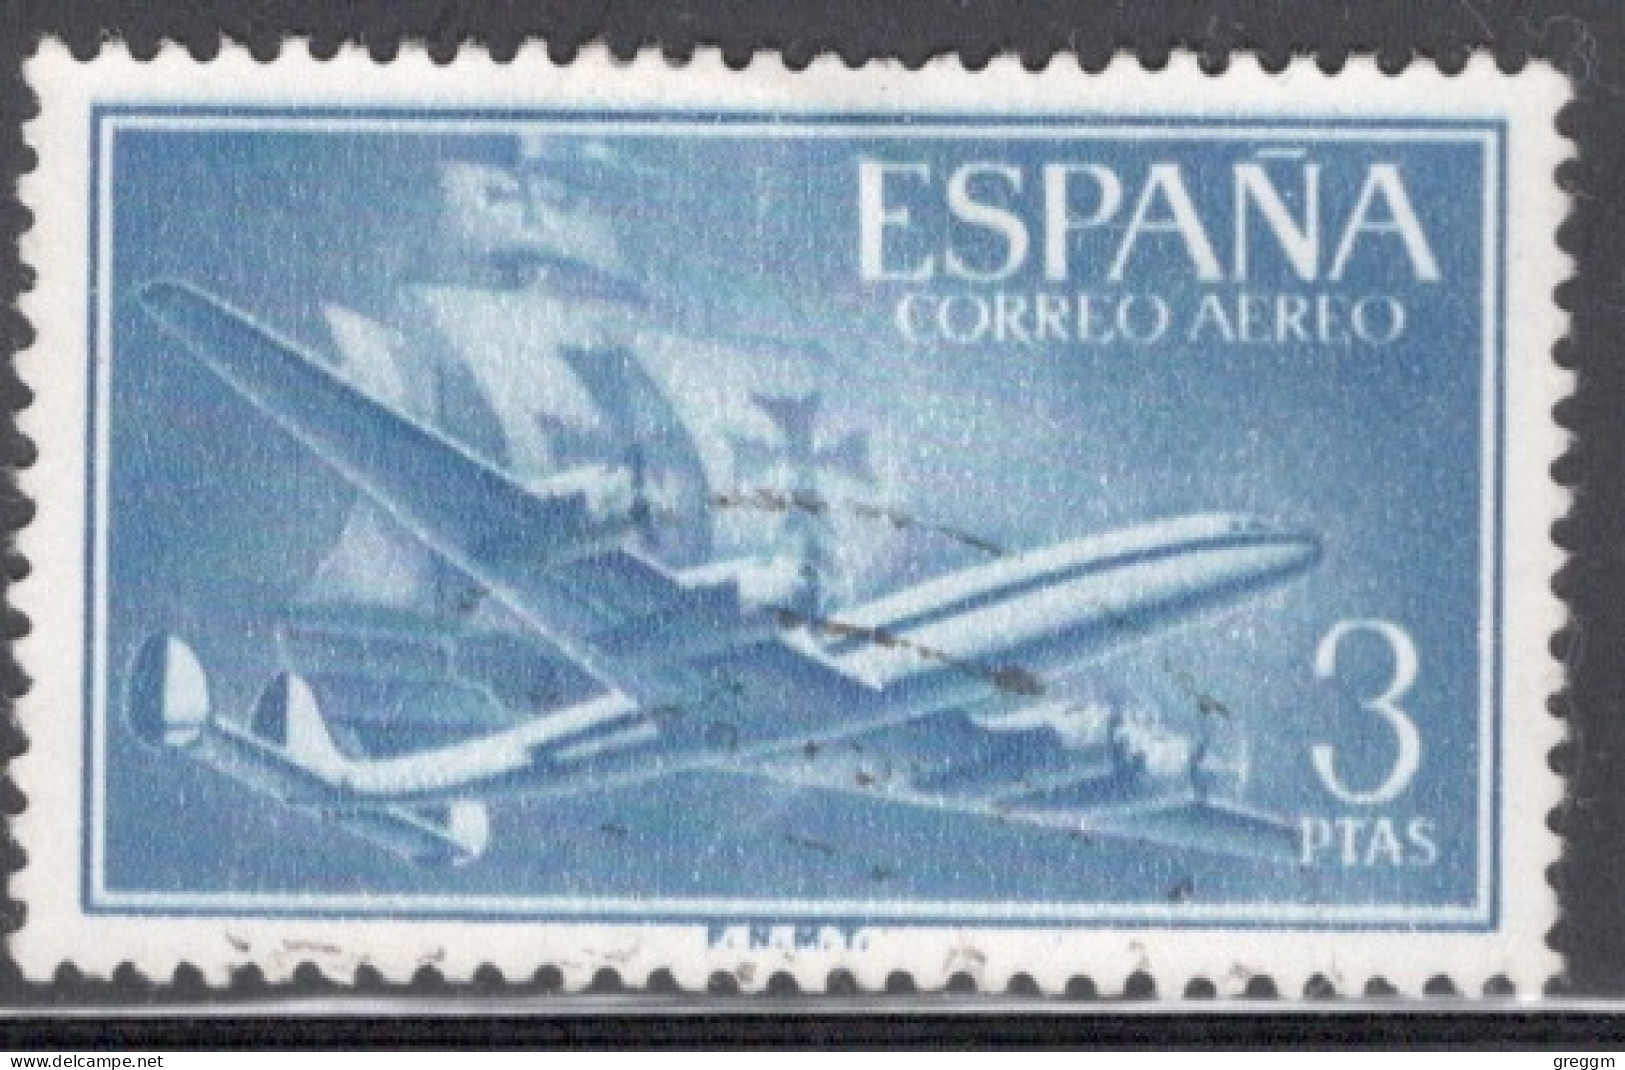 Spain 1955 Single Stamp Issued As An Airmail Definitive In Fine Used. - Used Stamps